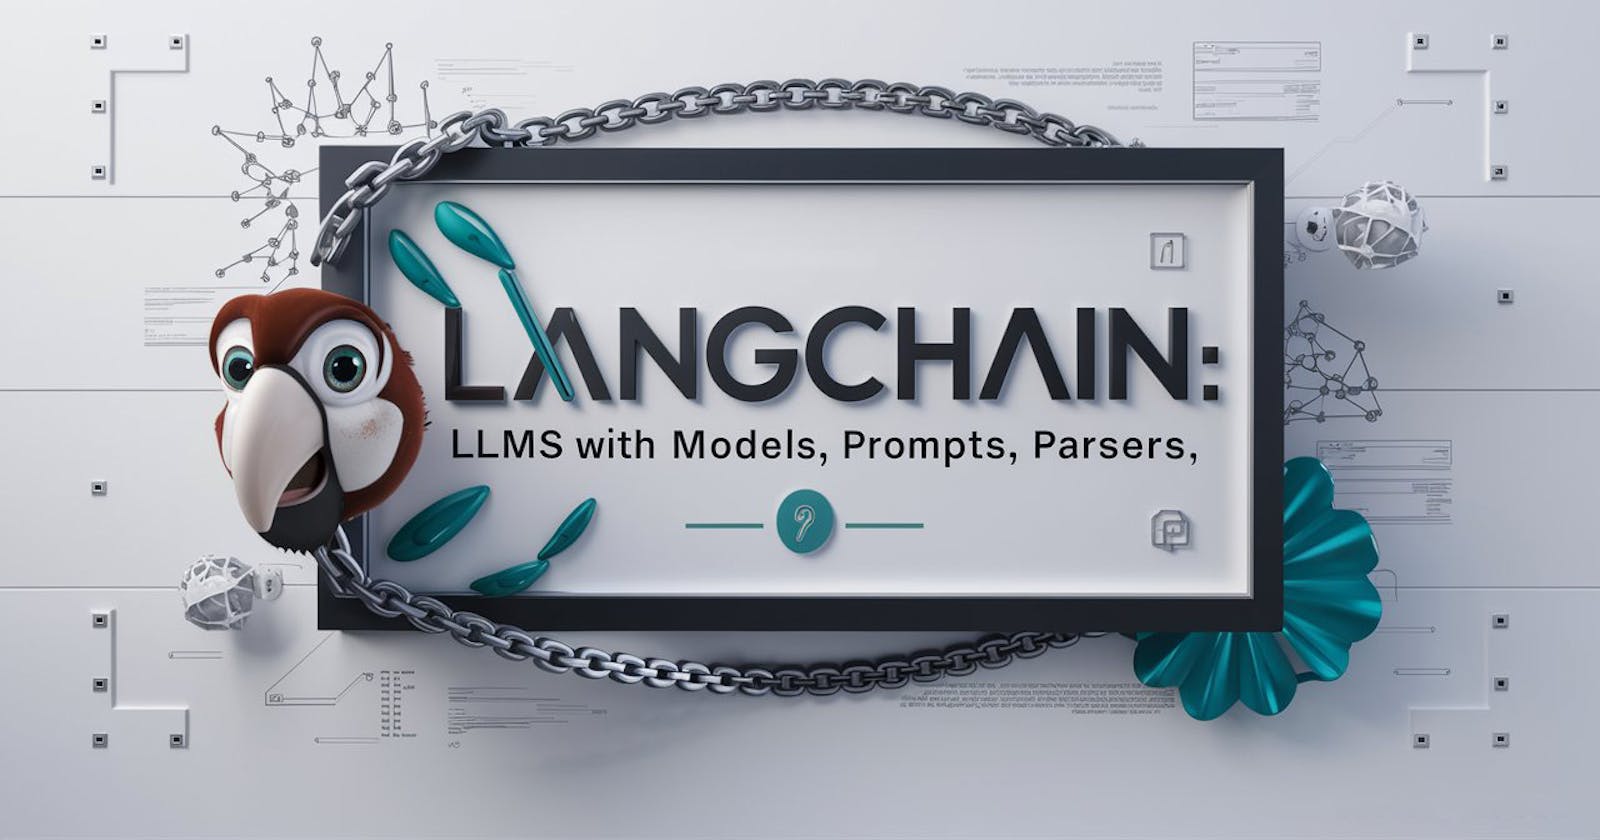 LangChain: LLMs with Models, Prompts, Parsers